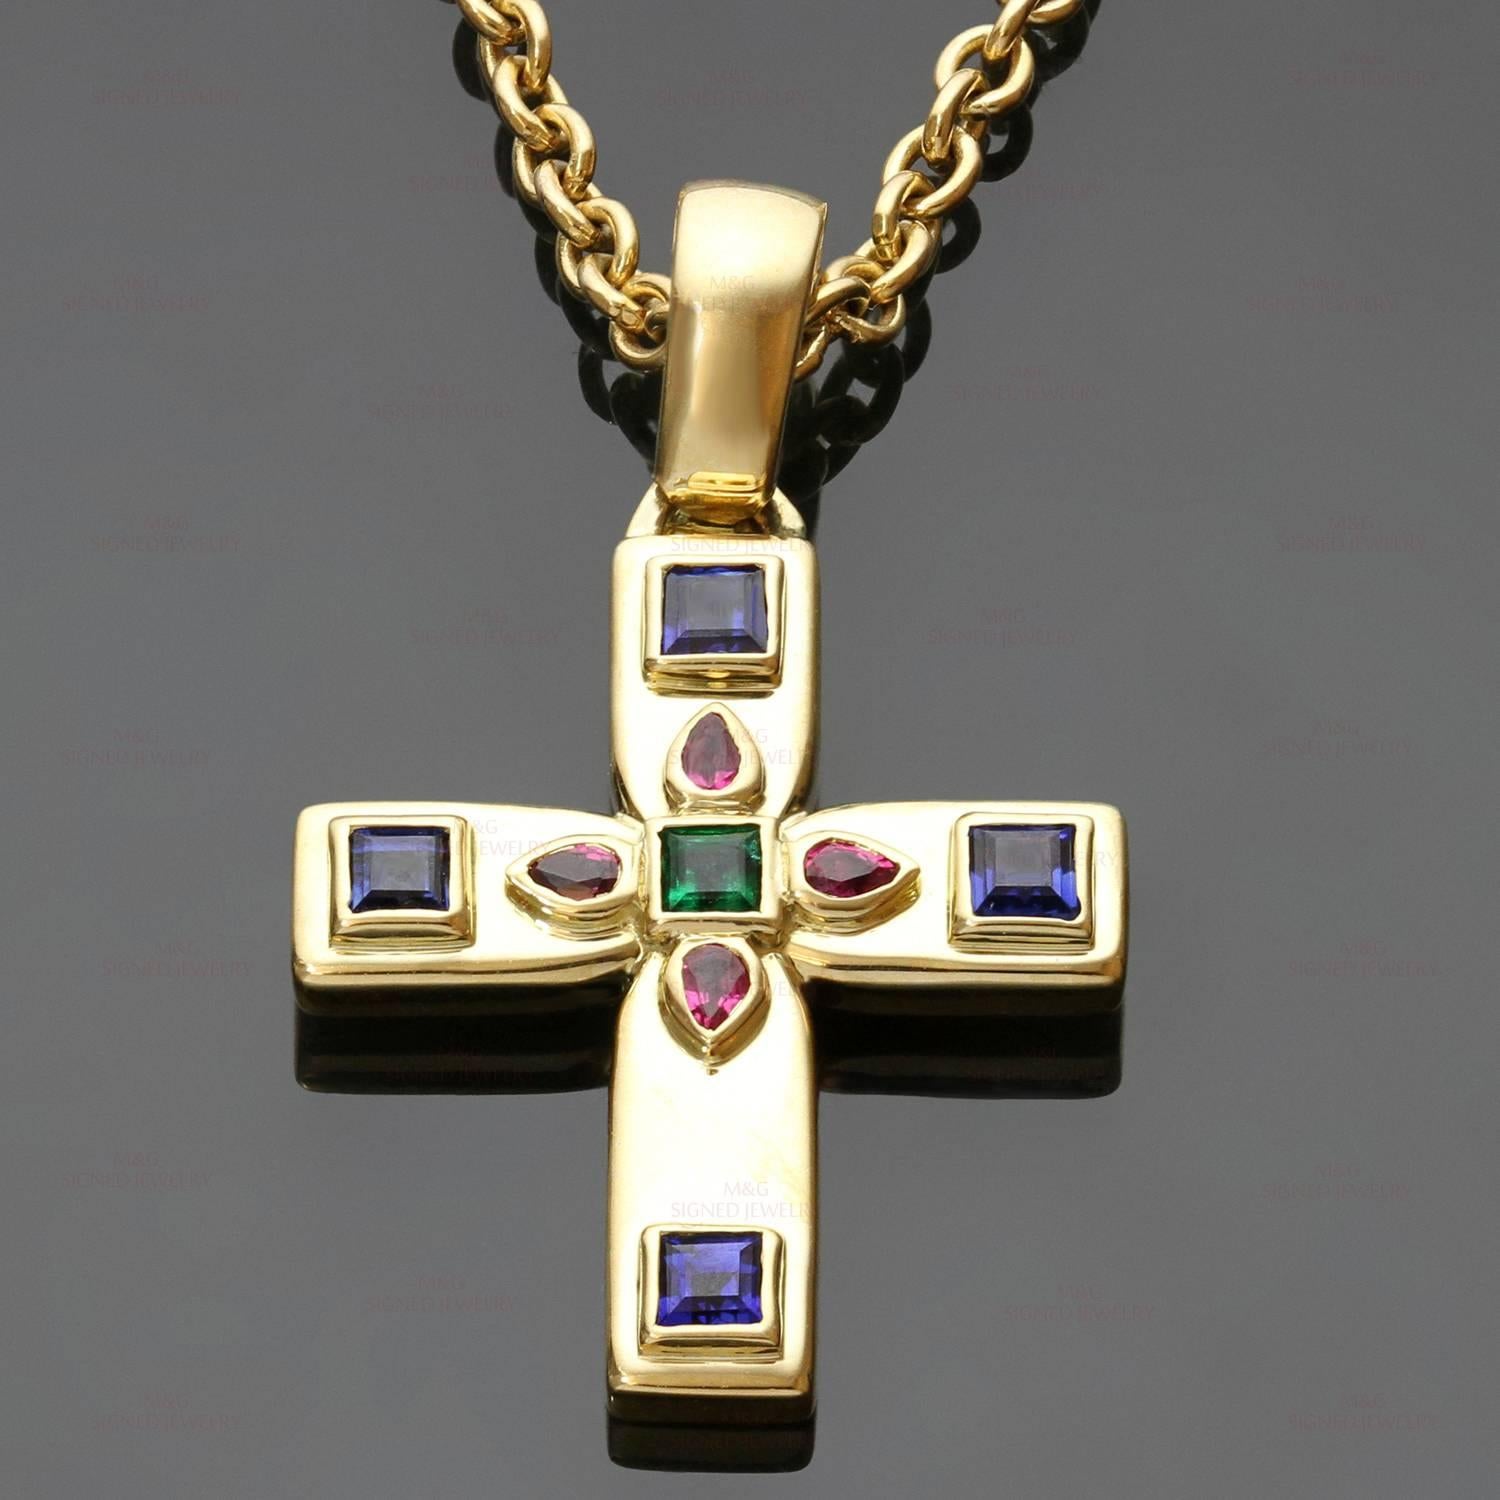 This magnificent Cartier enhancer cross pendant necklace is crafted in 18k yellow gold and set with faceted rubies, sapphires, and emerald. The Byzantine motif was designed by Louis Cartier during his trip to Russia in the early part of the 20th